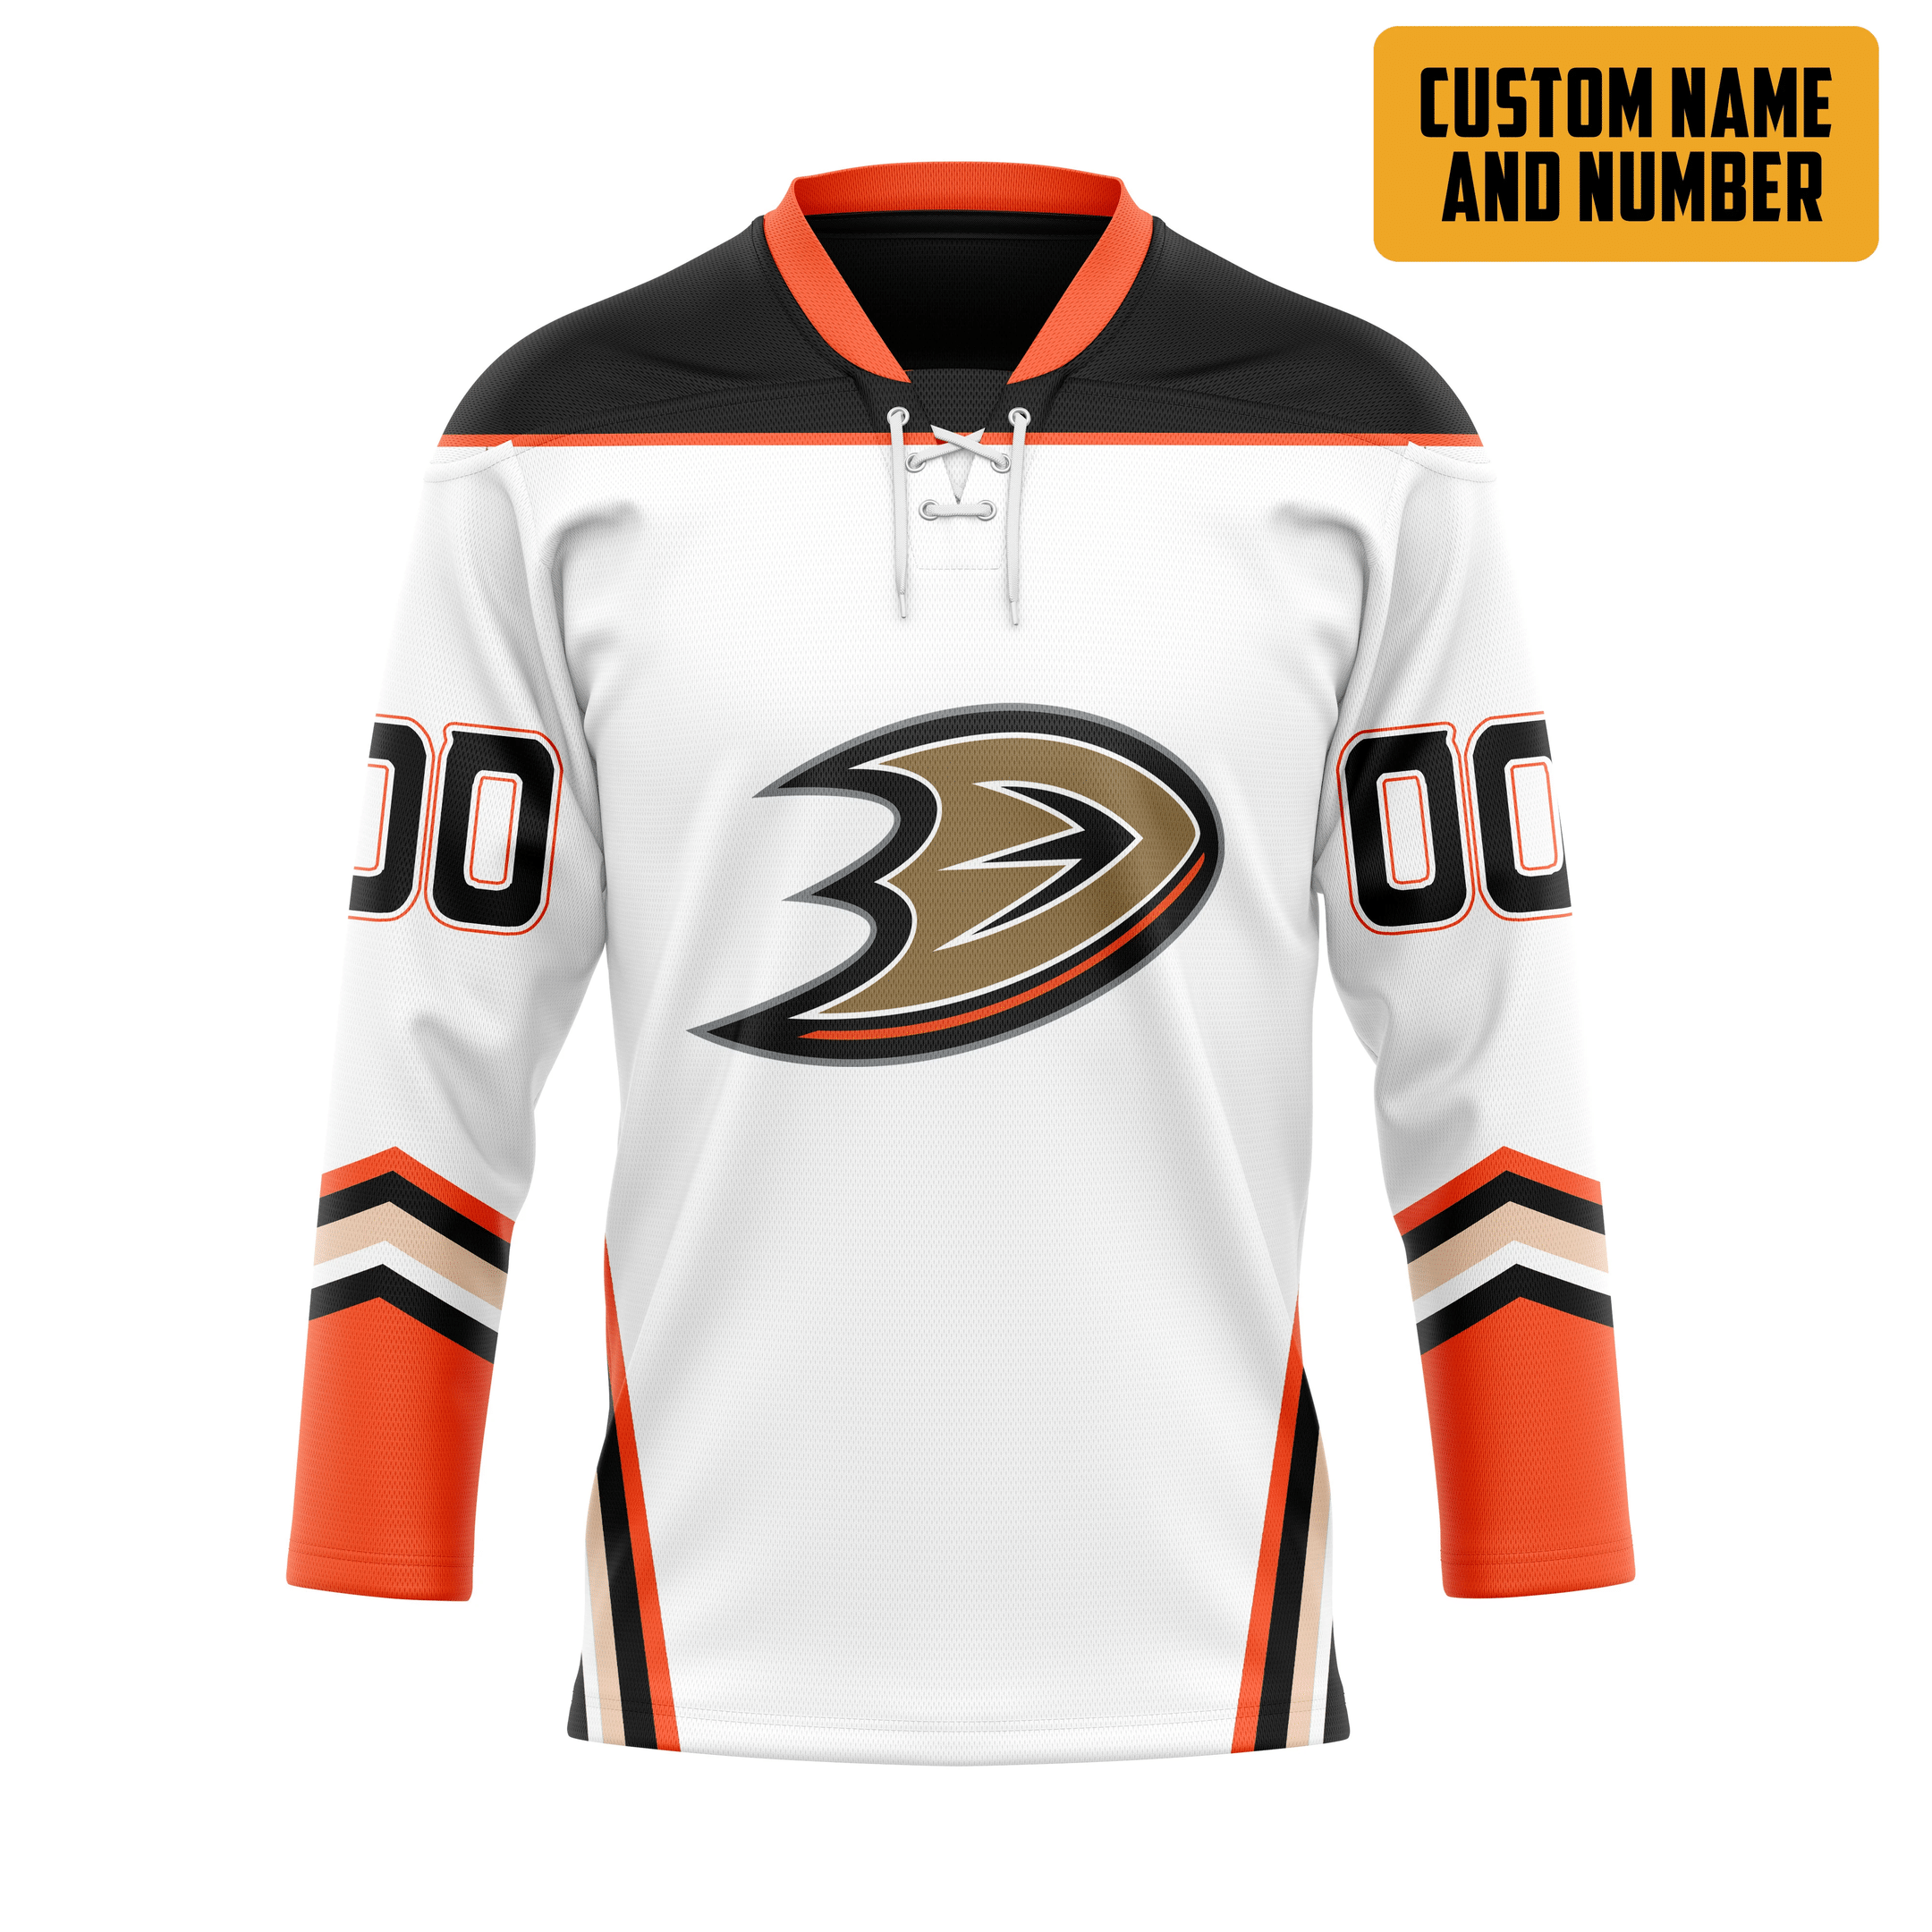 Top cool Hockey jersey for fan You can buy online. 3